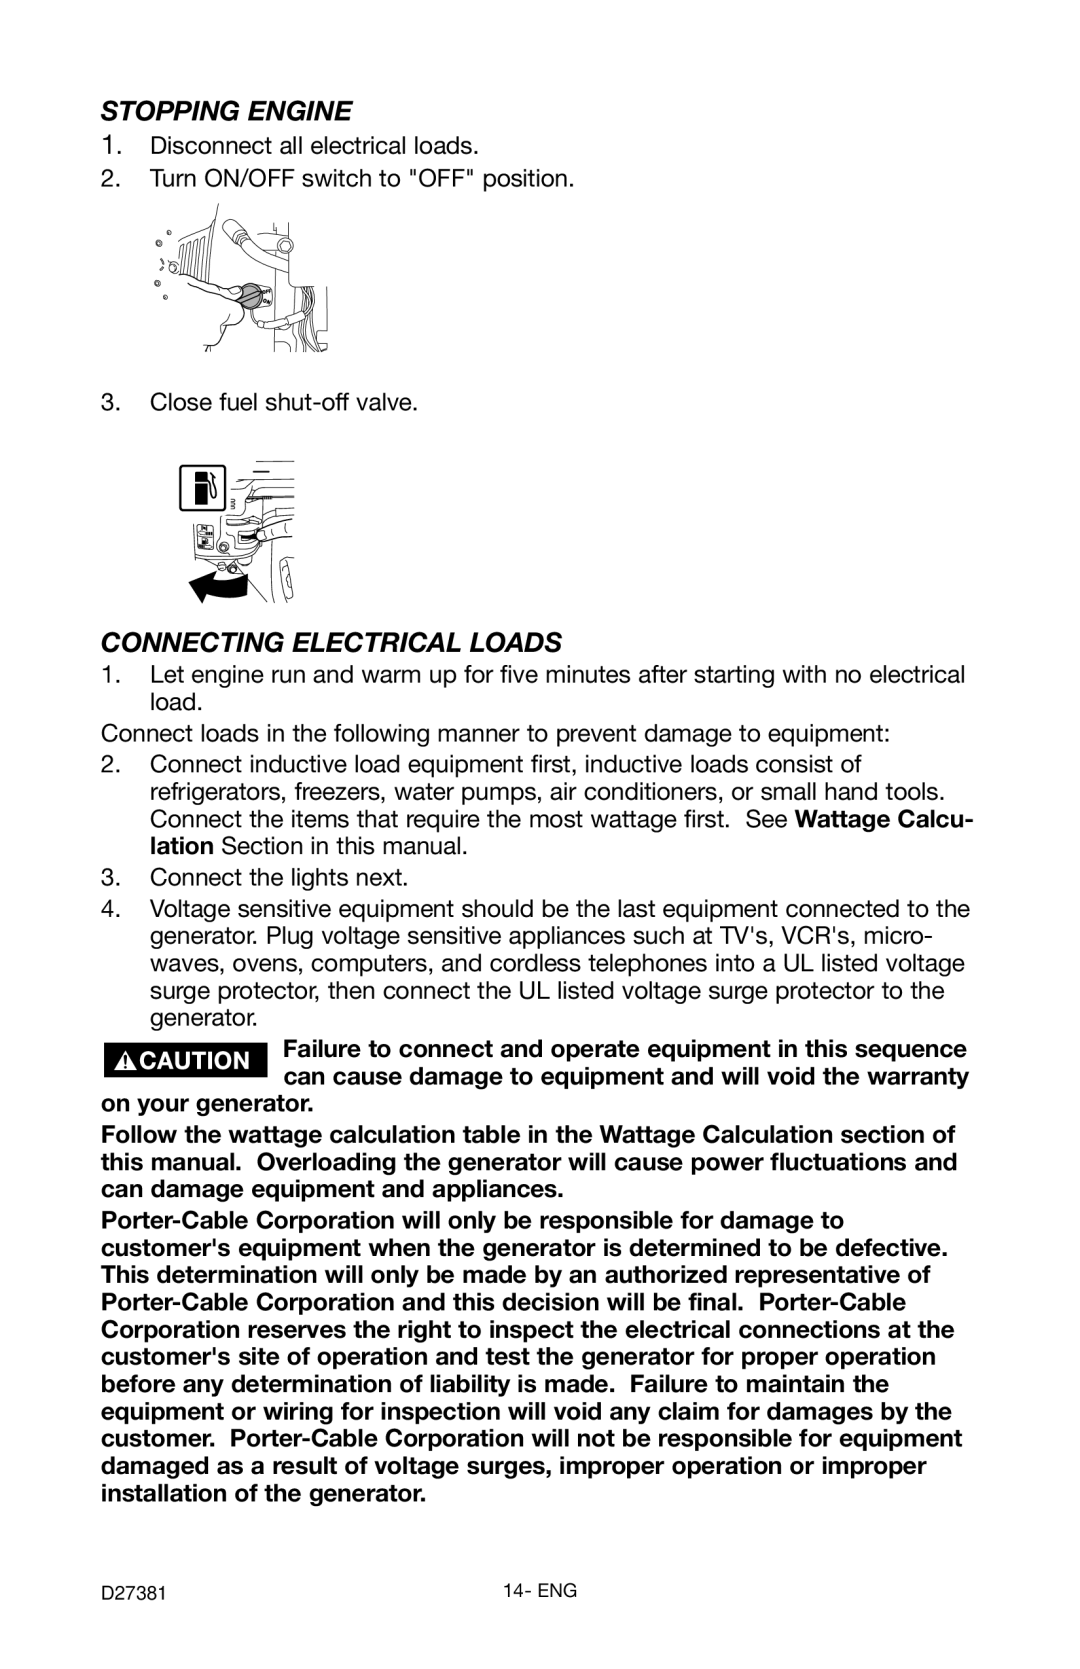 Porter-Cable PH350IS instruction manual Stopping Engine, Connecting Electrical Loads 